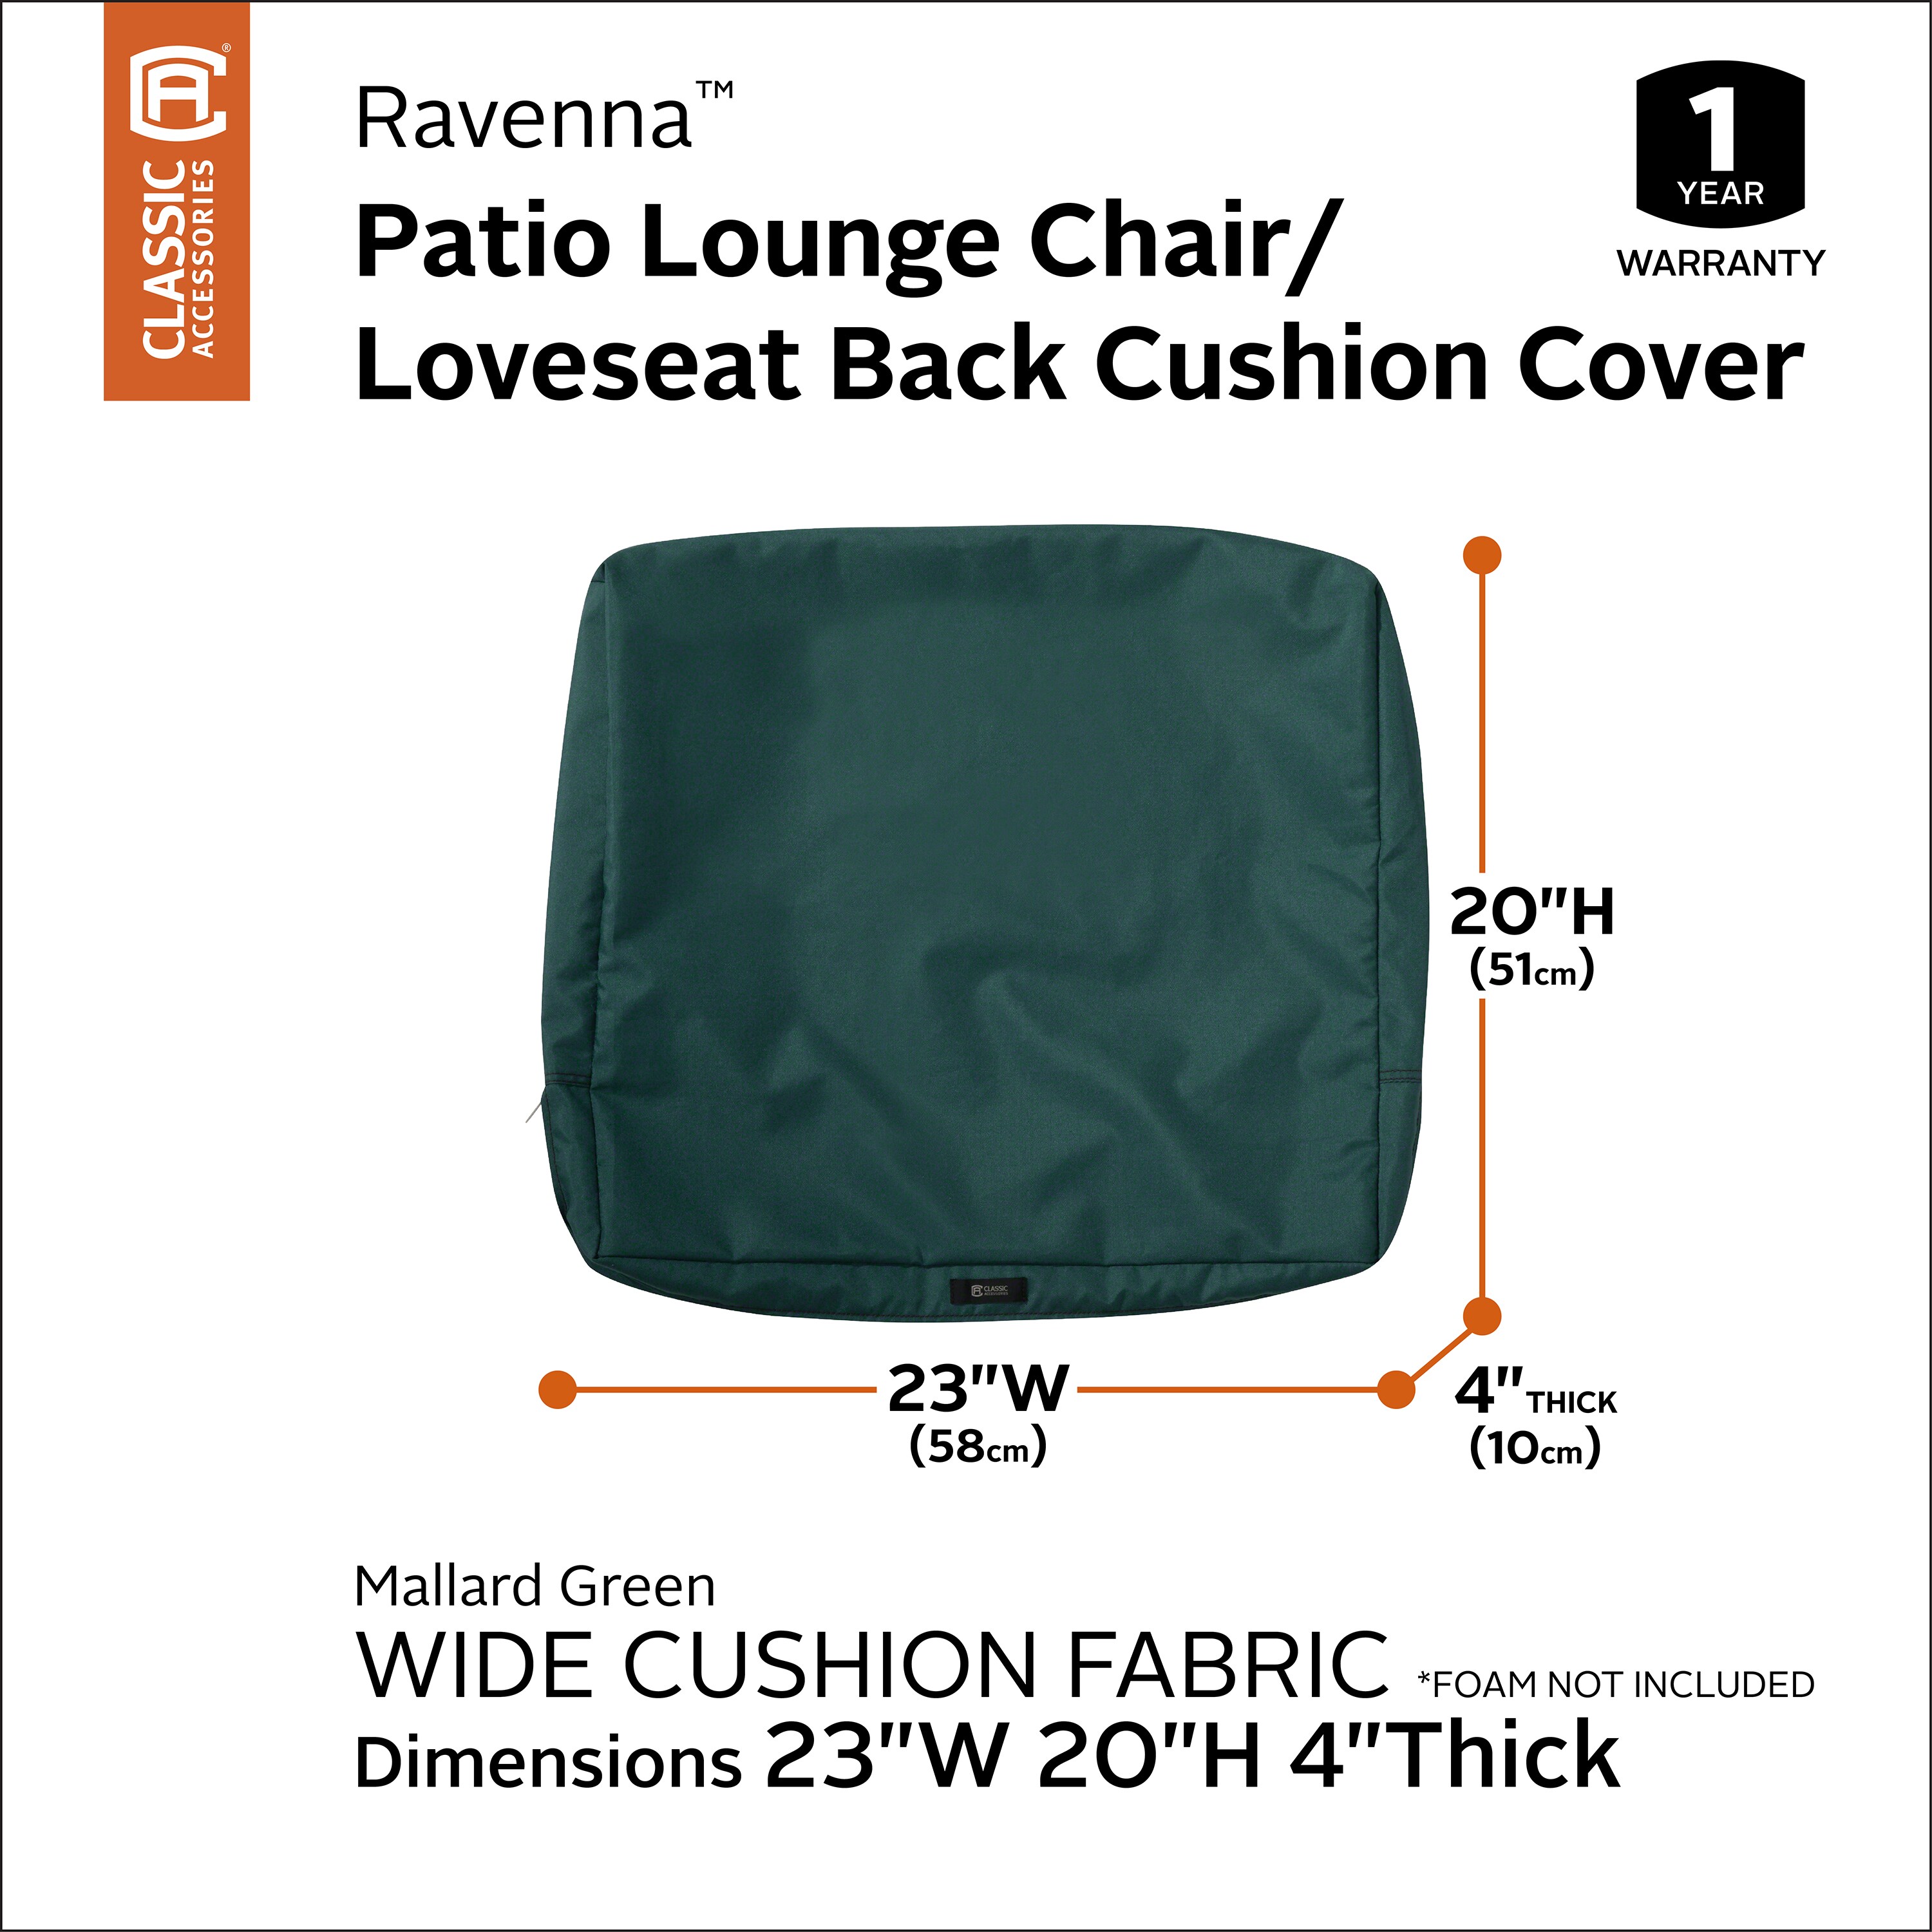 Classic Accessories Patio Lounge Back Cushion Foam - 4 Thick